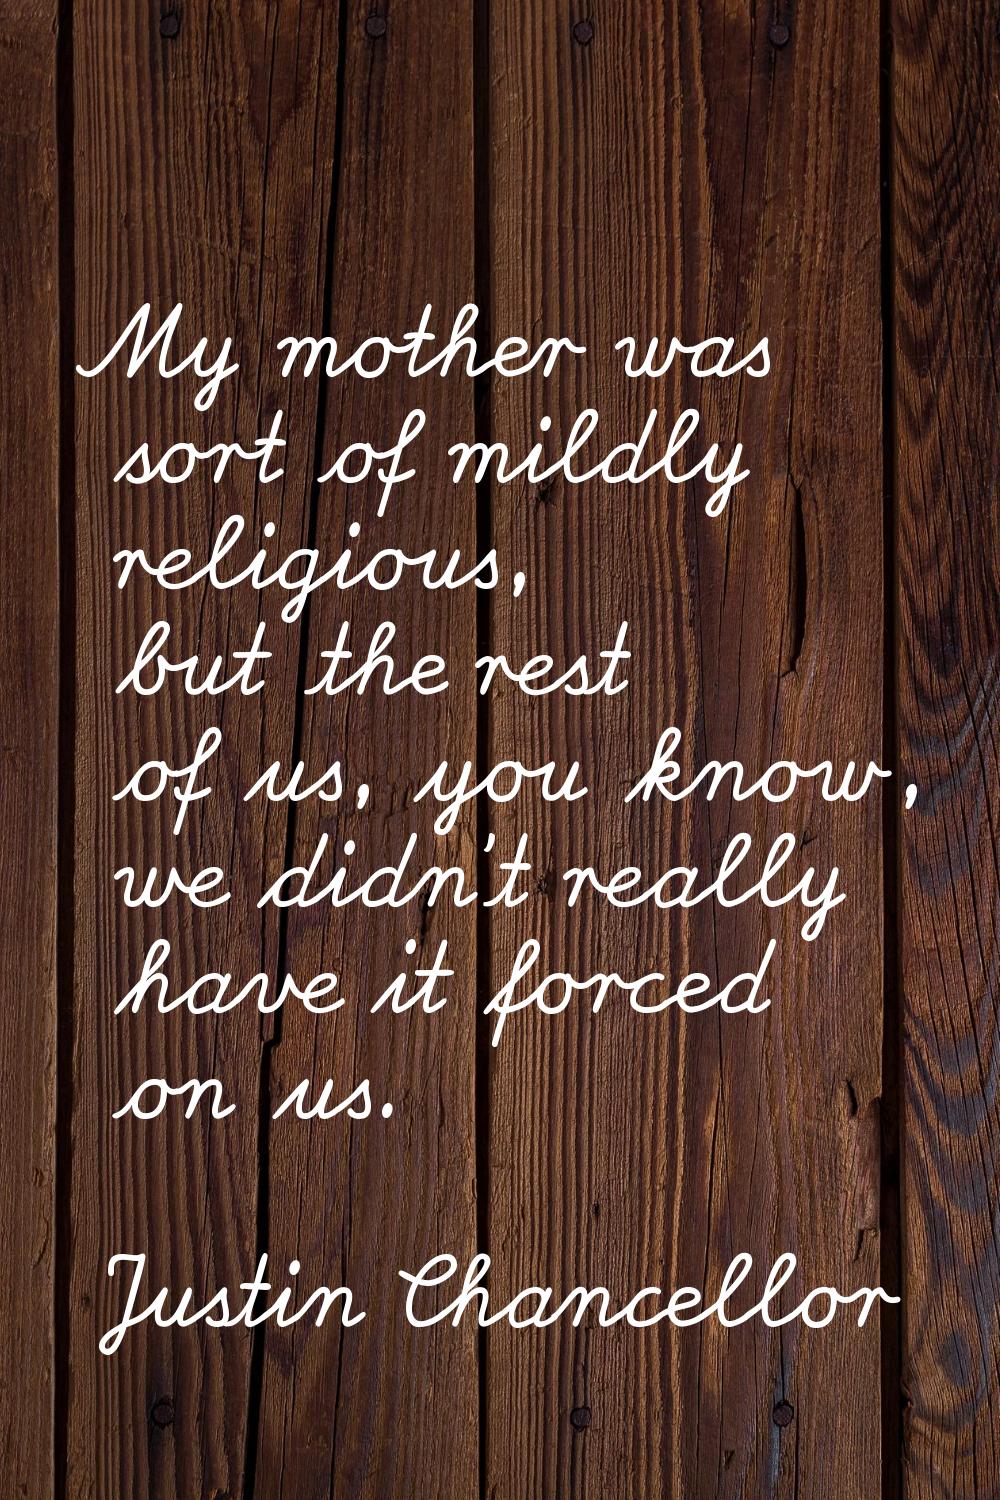 My mother was sort of mildly religious, but the rest of us, you know, we didn't really have it forc